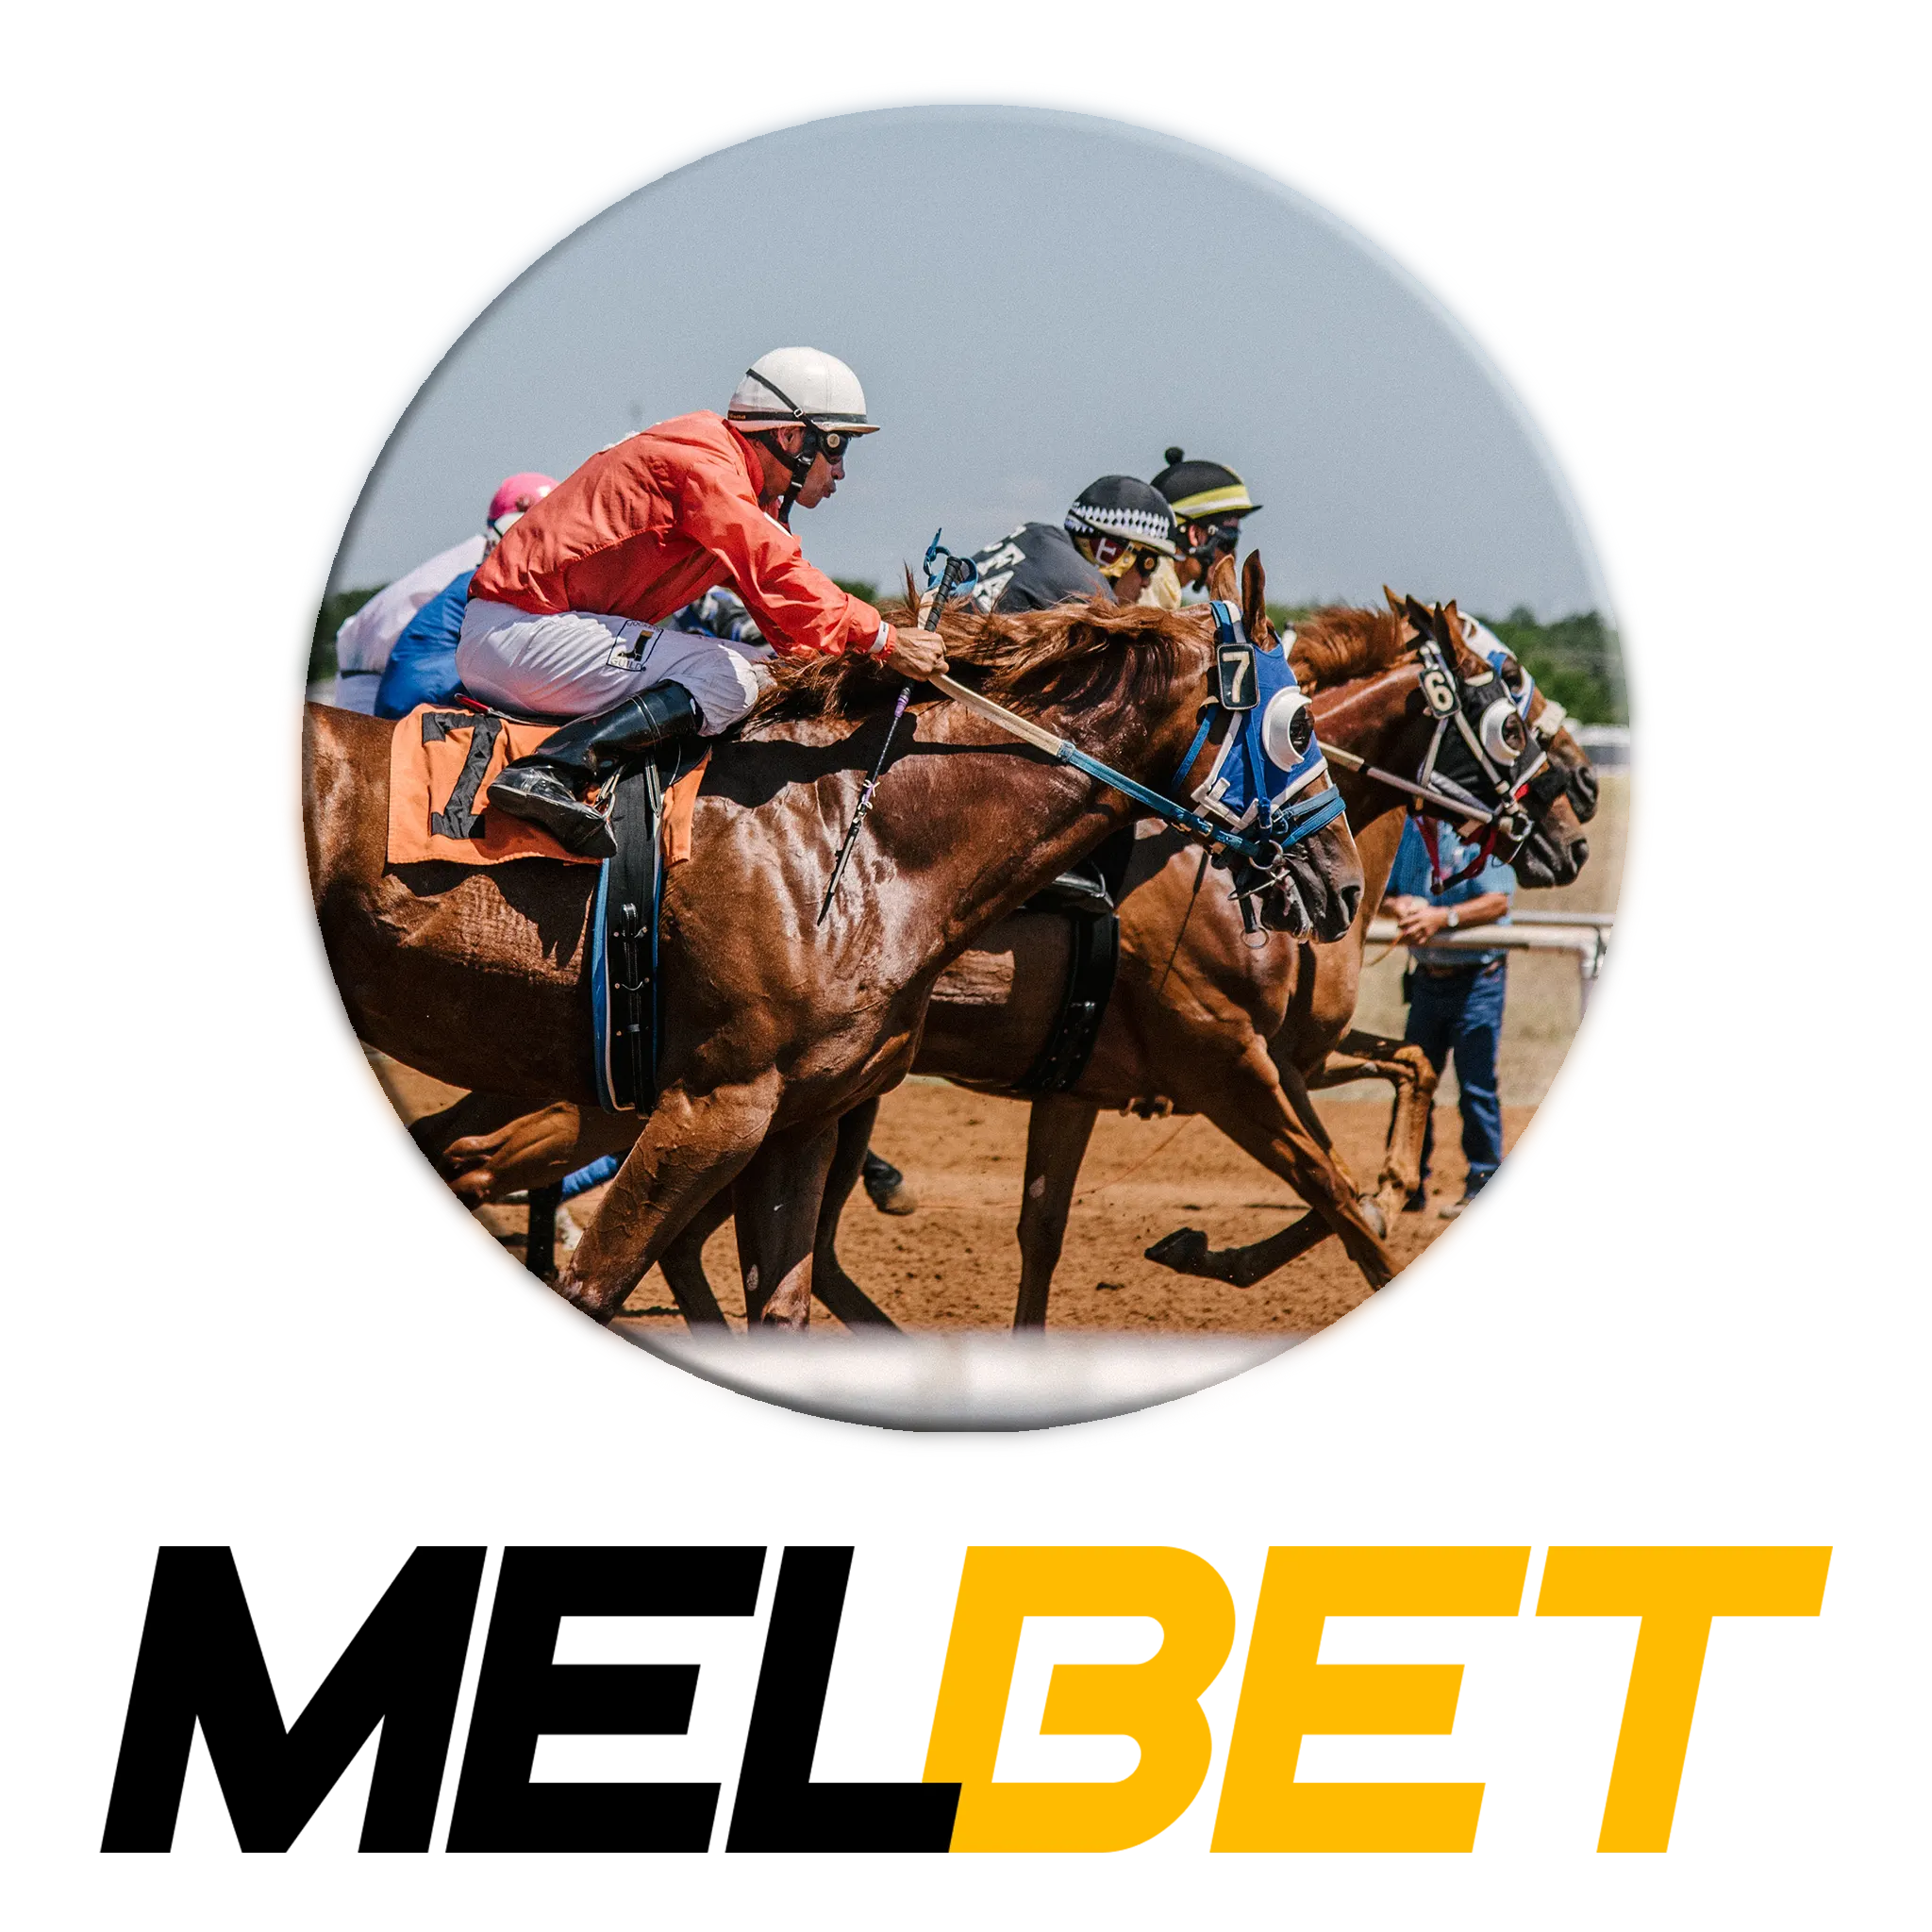 Start betting on horse racing online with Melbet!